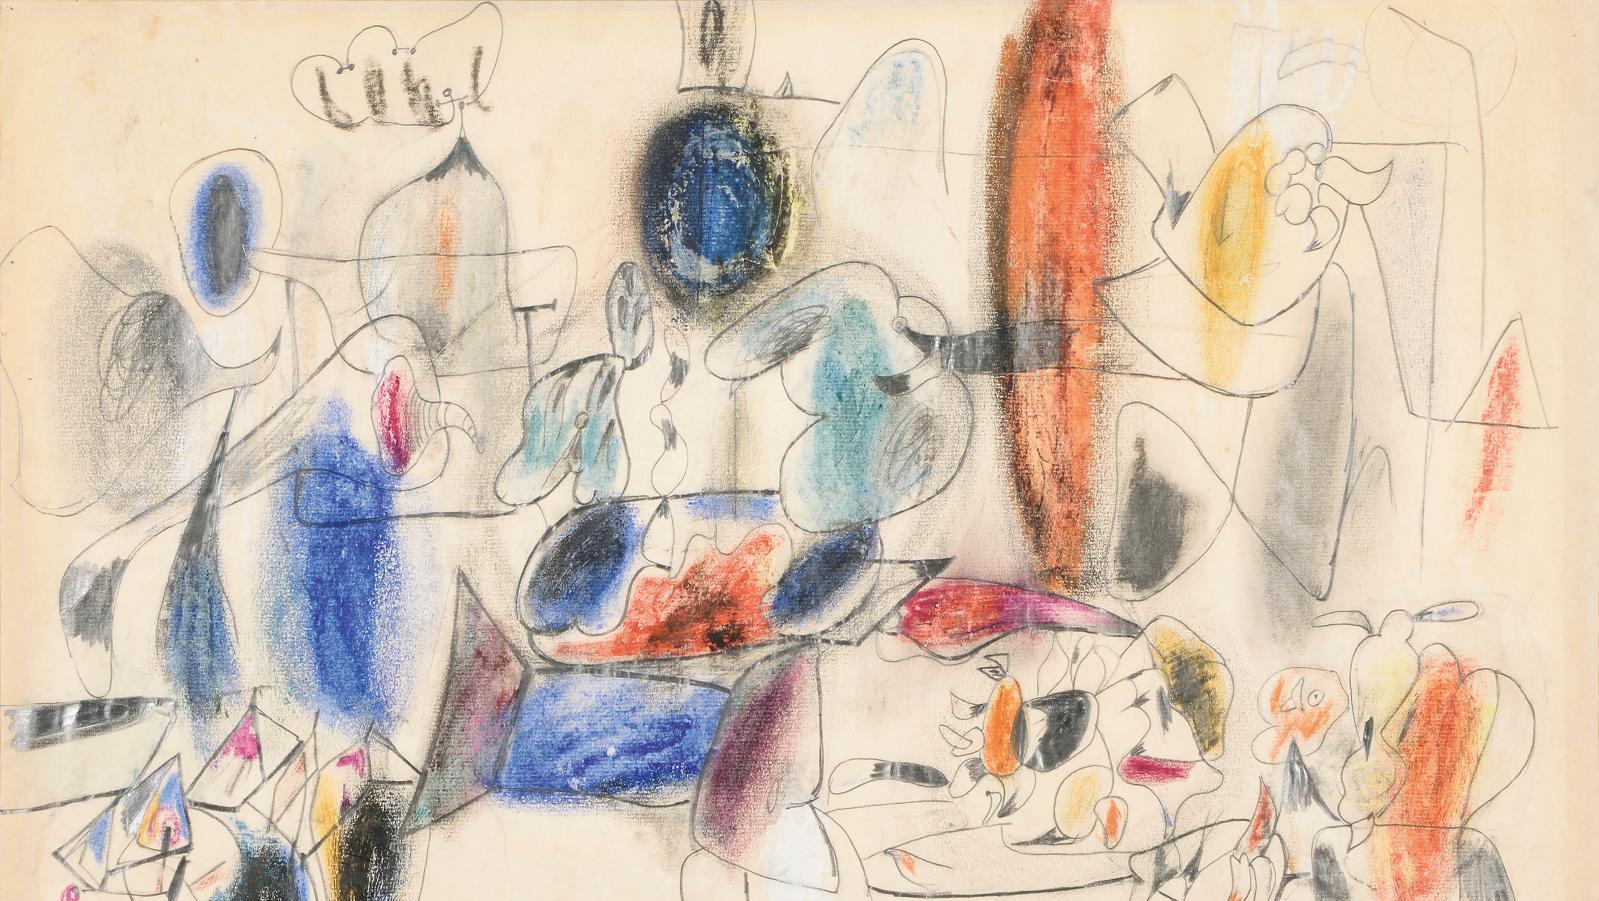 Arshile Gorky (1904-1948), Untitled, graphite and pencil on paper, 1943, 43.2 cm... The Sense of Dislocation in an American Precursor, Arshile Gorky